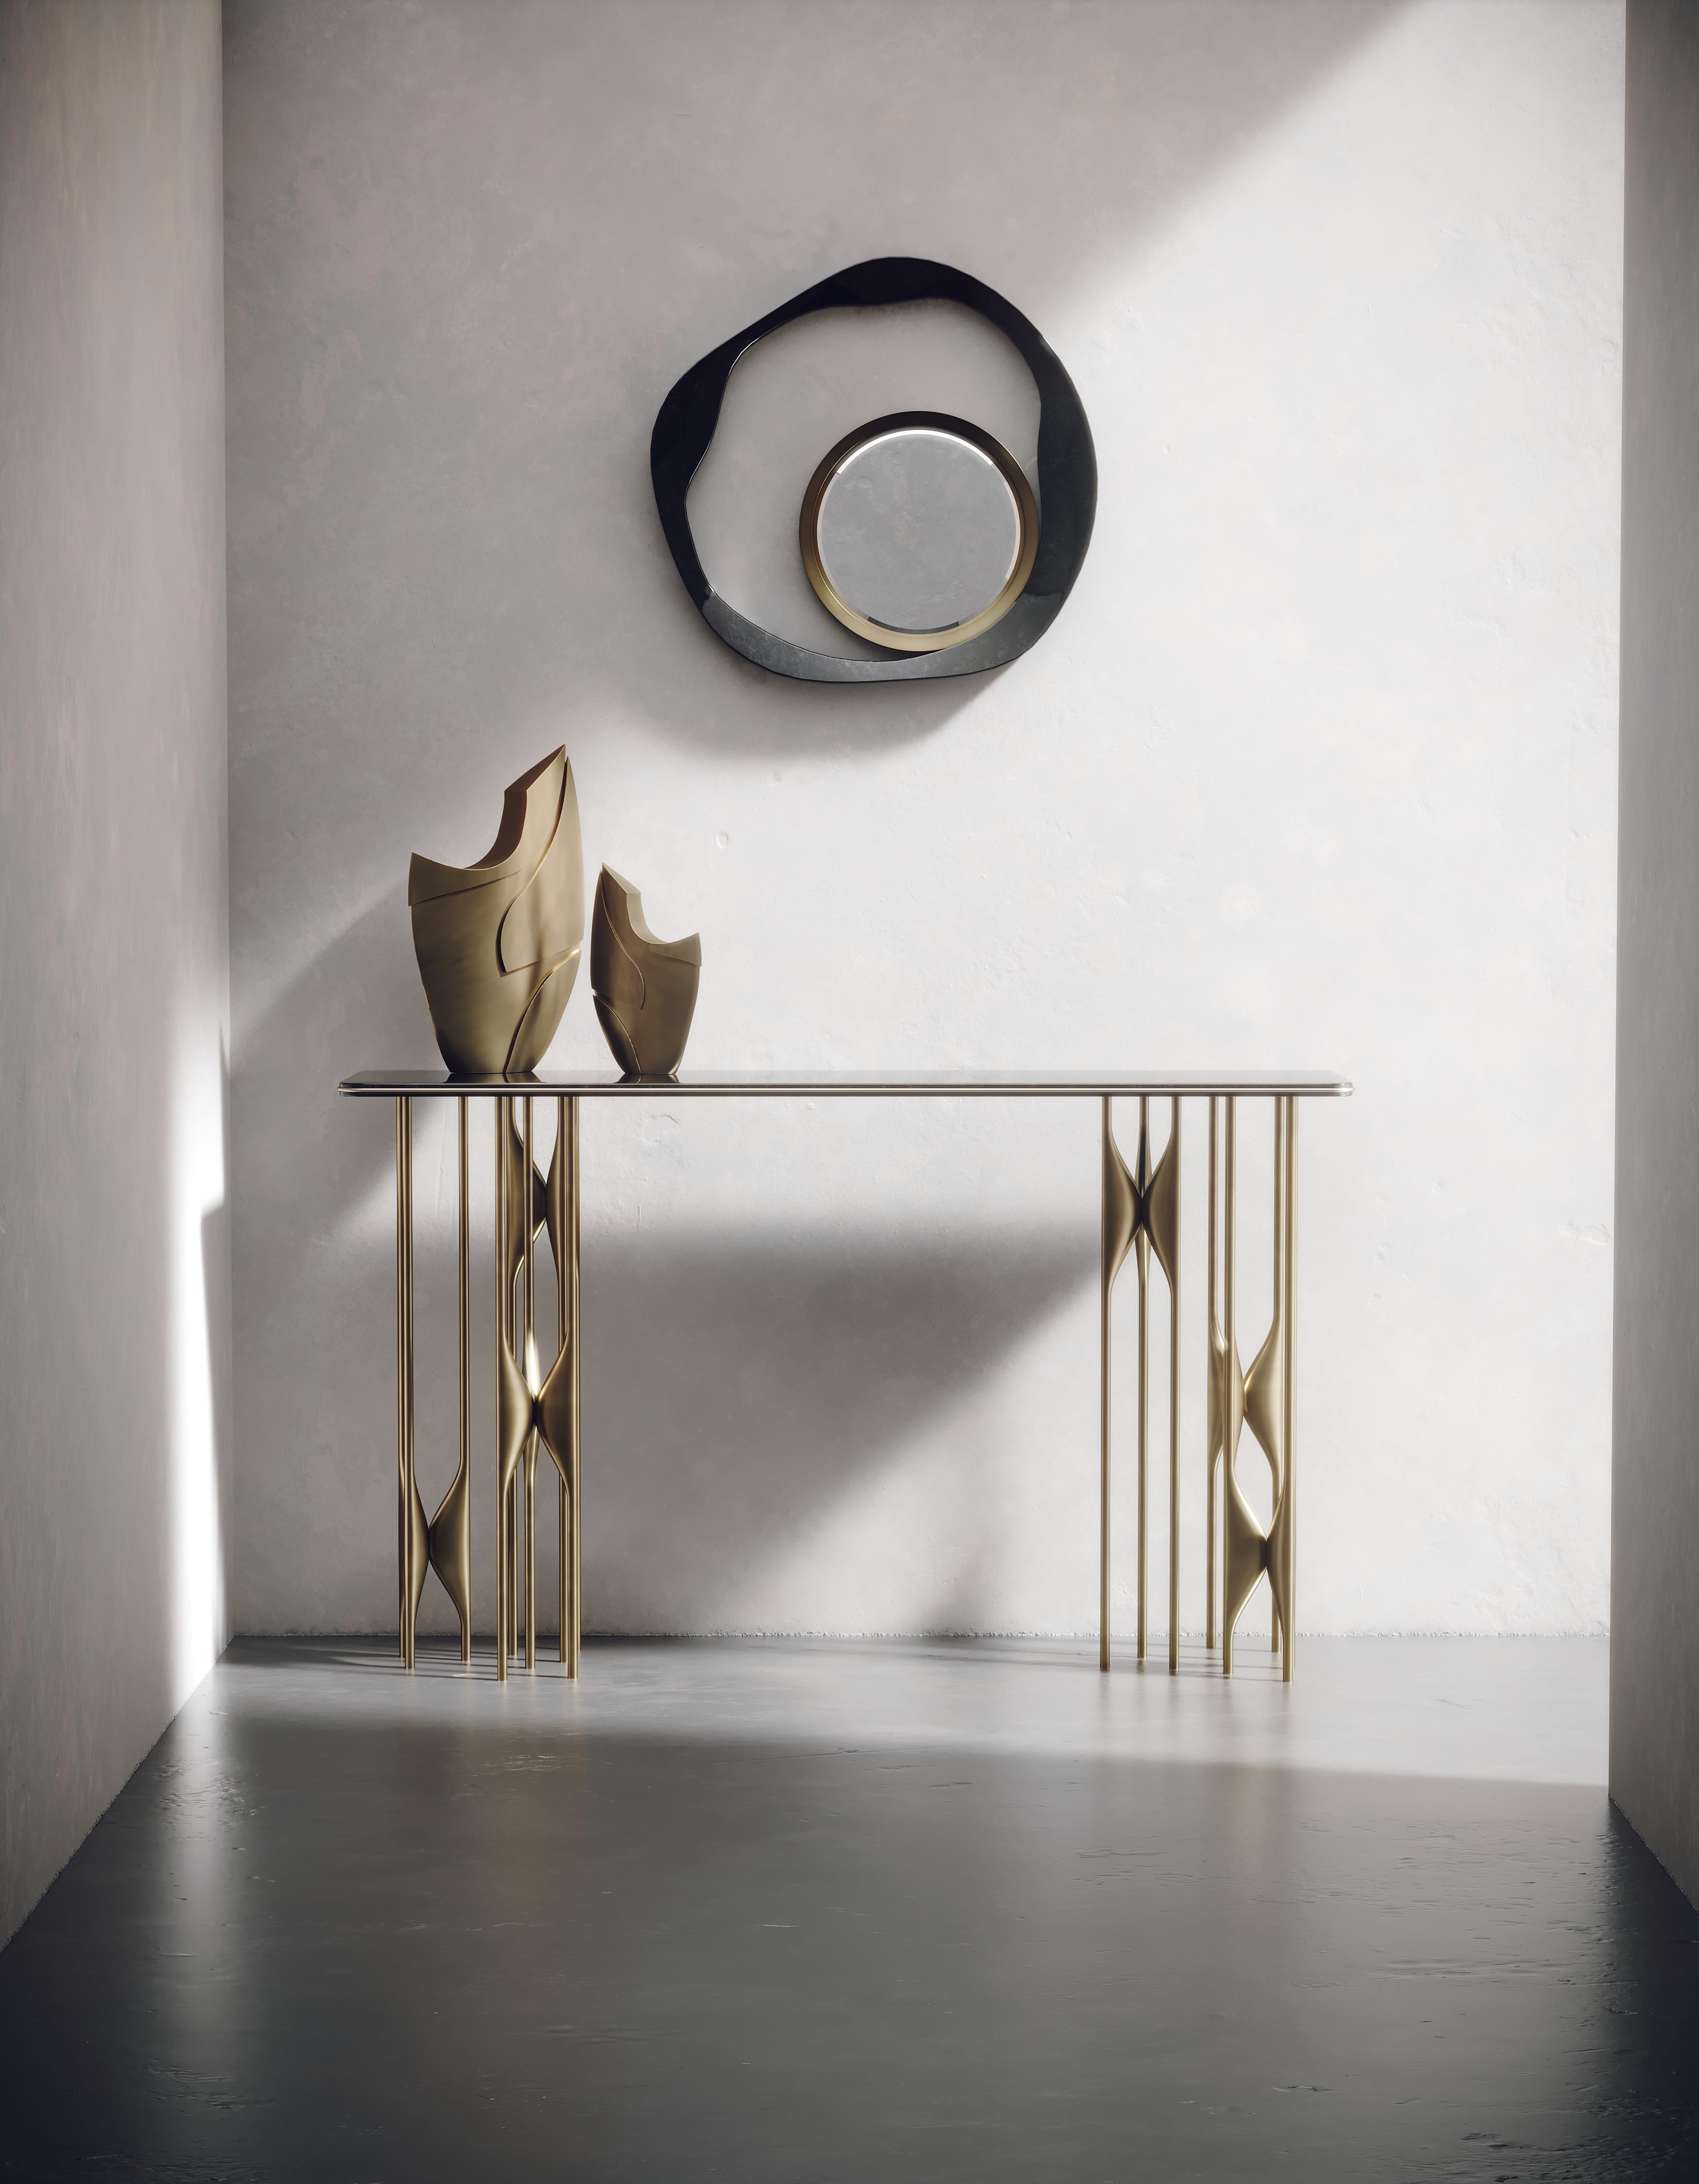 The Plumeria Console by Kifu Paris is a dramatic and sculptural piece. The coal black shagreen inlaid top sits on clusters of bronze-patina brass legs that are conceptually inspired by bird feathers floating on top of a lake. The border of the top